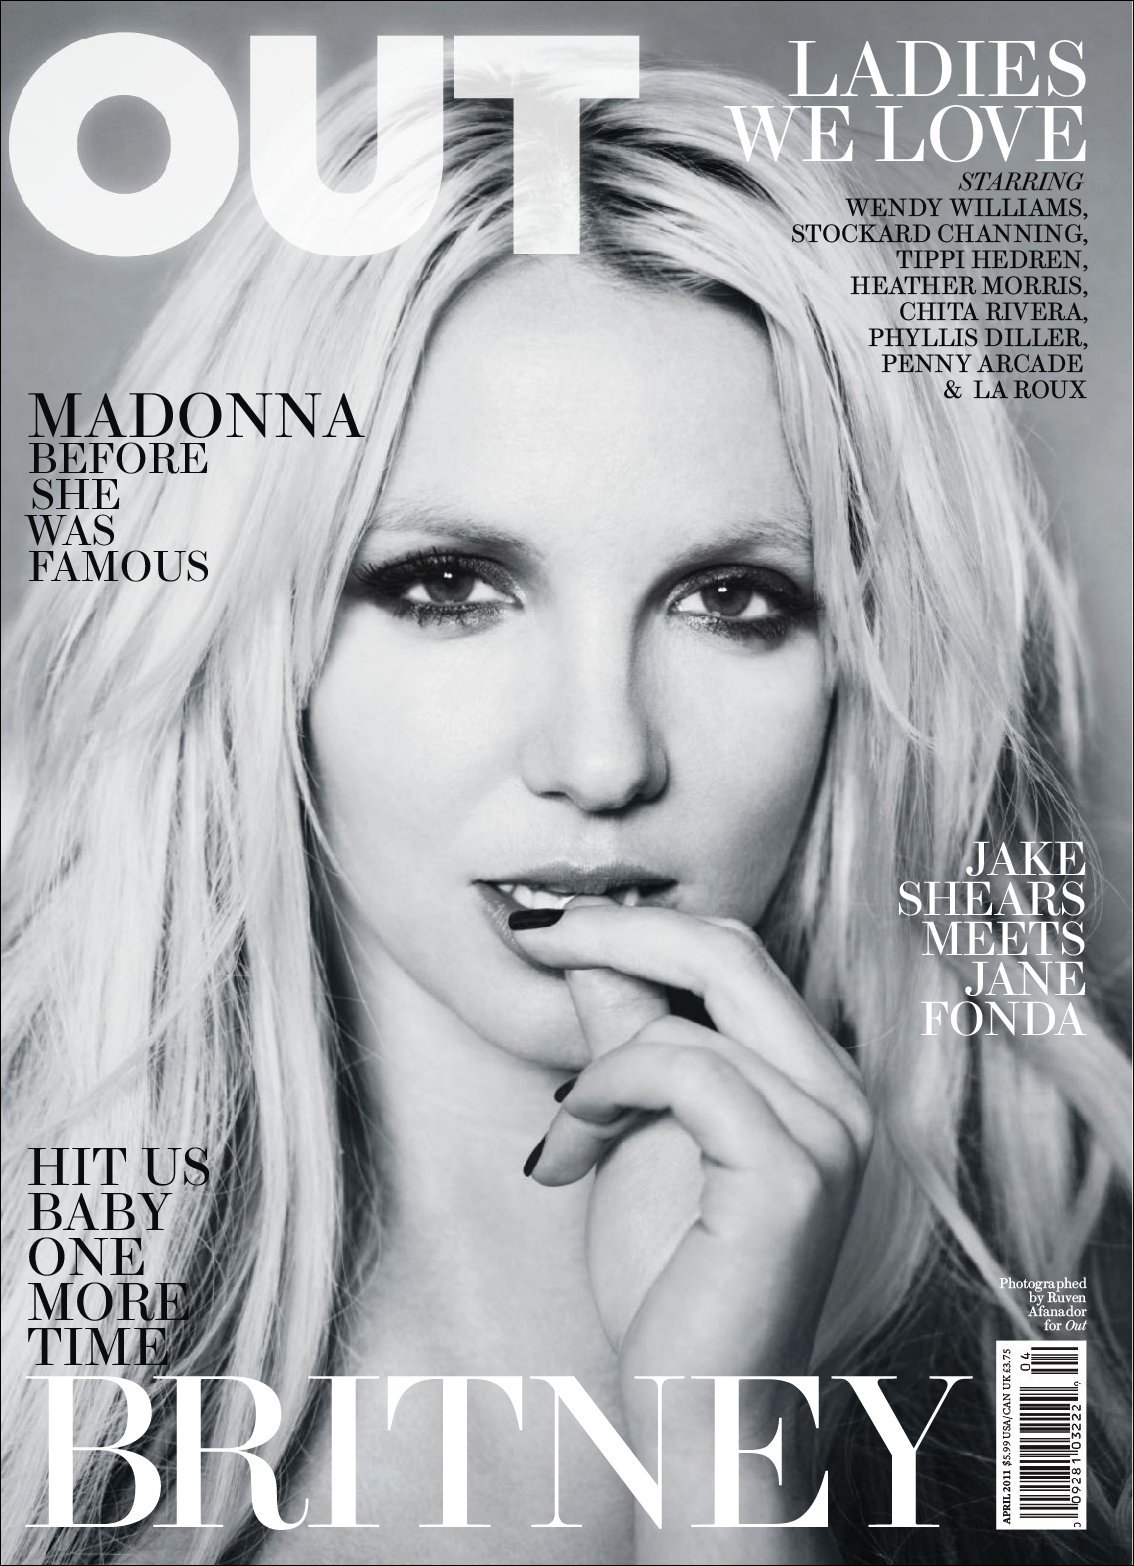 OUT-Britney Spears Magazine (Digital) Subscription Discount ...